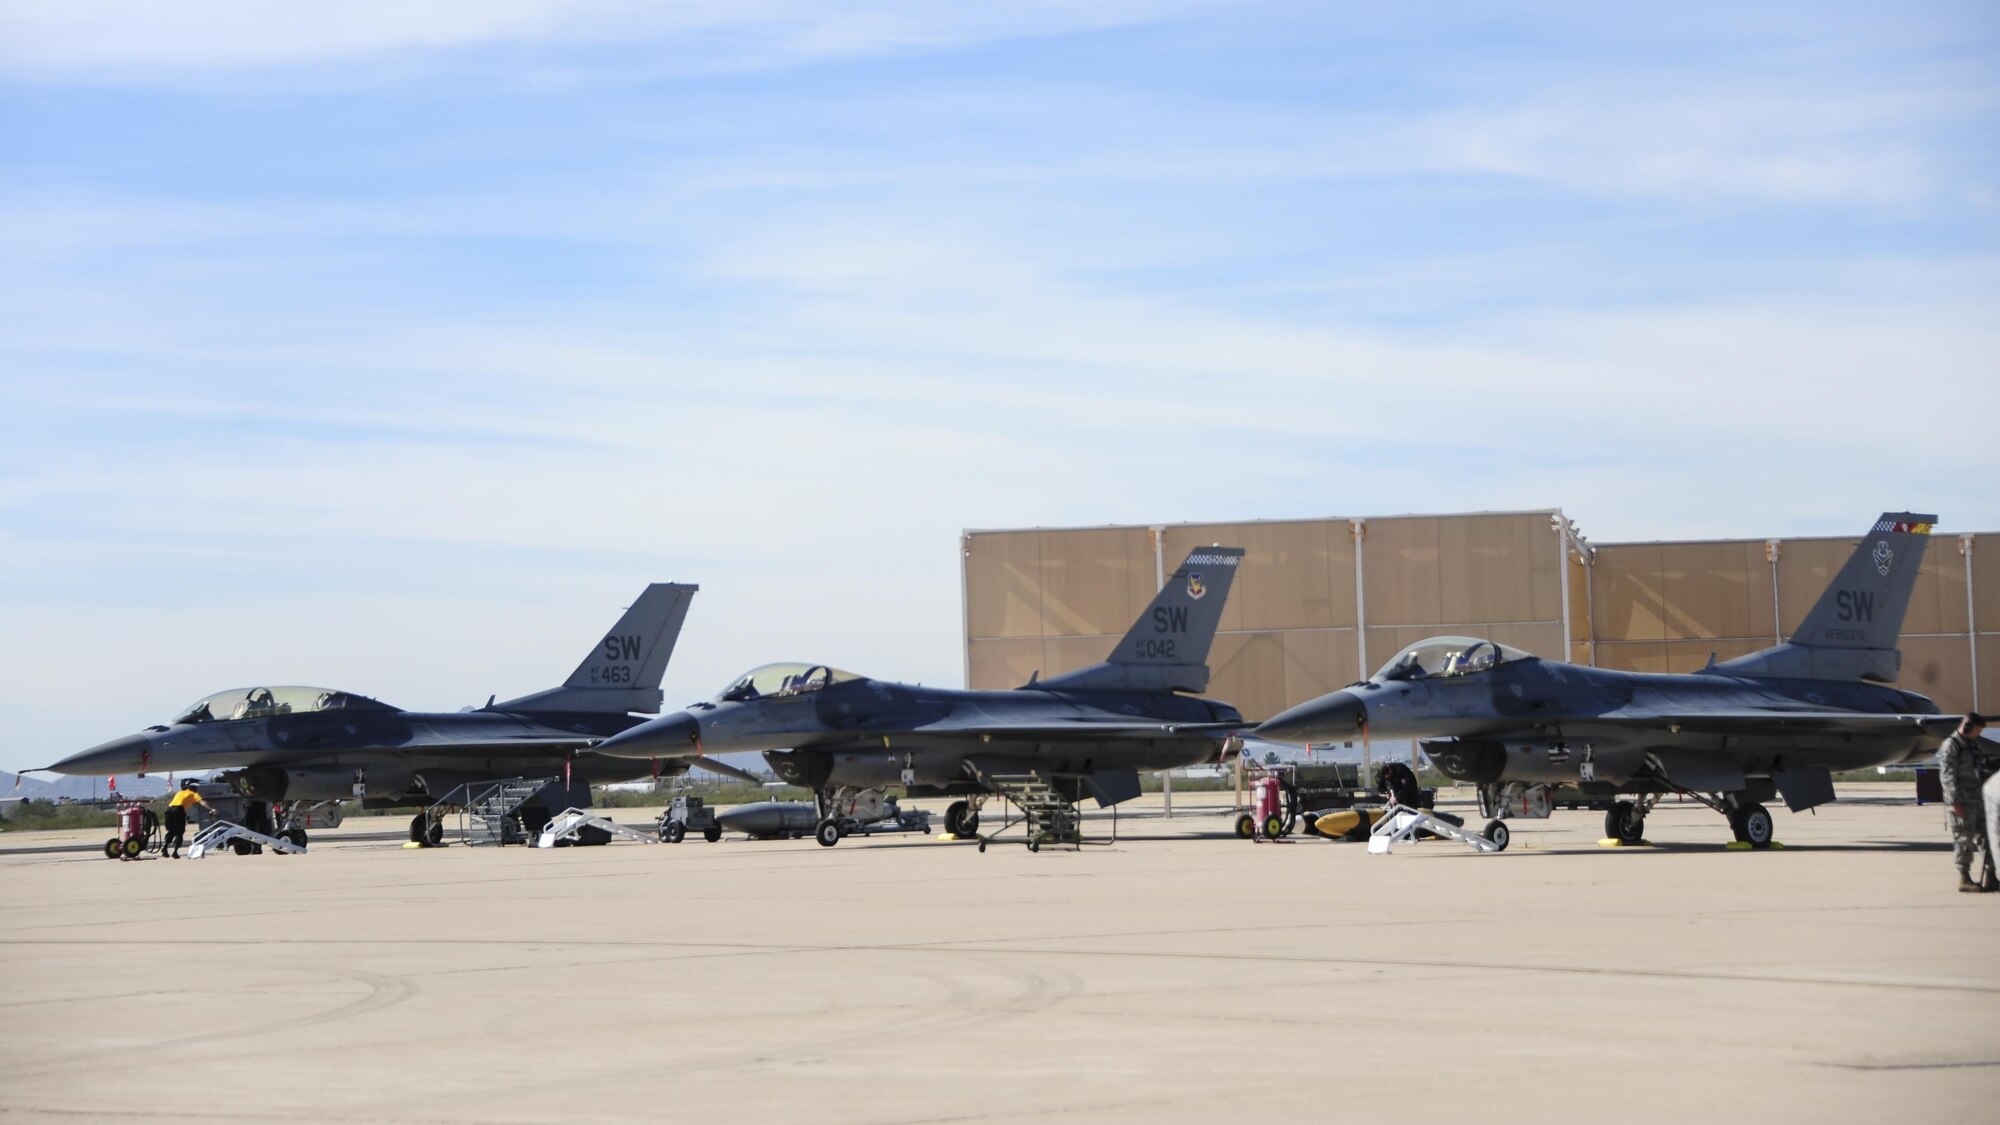 Three U.S. Air Force F-16 Fighting Falcons rest on the flight line during the 2017 Heritage Flight Training and Certification Course at Davis-Monthan Air Force Base, Ariz., Feb. 9, 2017. During the course, aircrews practice ground and flight training to enable civilian pilots of historic military aircraft and U.S. Air Force pilots of current fighter aircraft to safely fly in formations together. (U.S. Air Force Photo by Airman 1st Class Nathan H. Barbour)